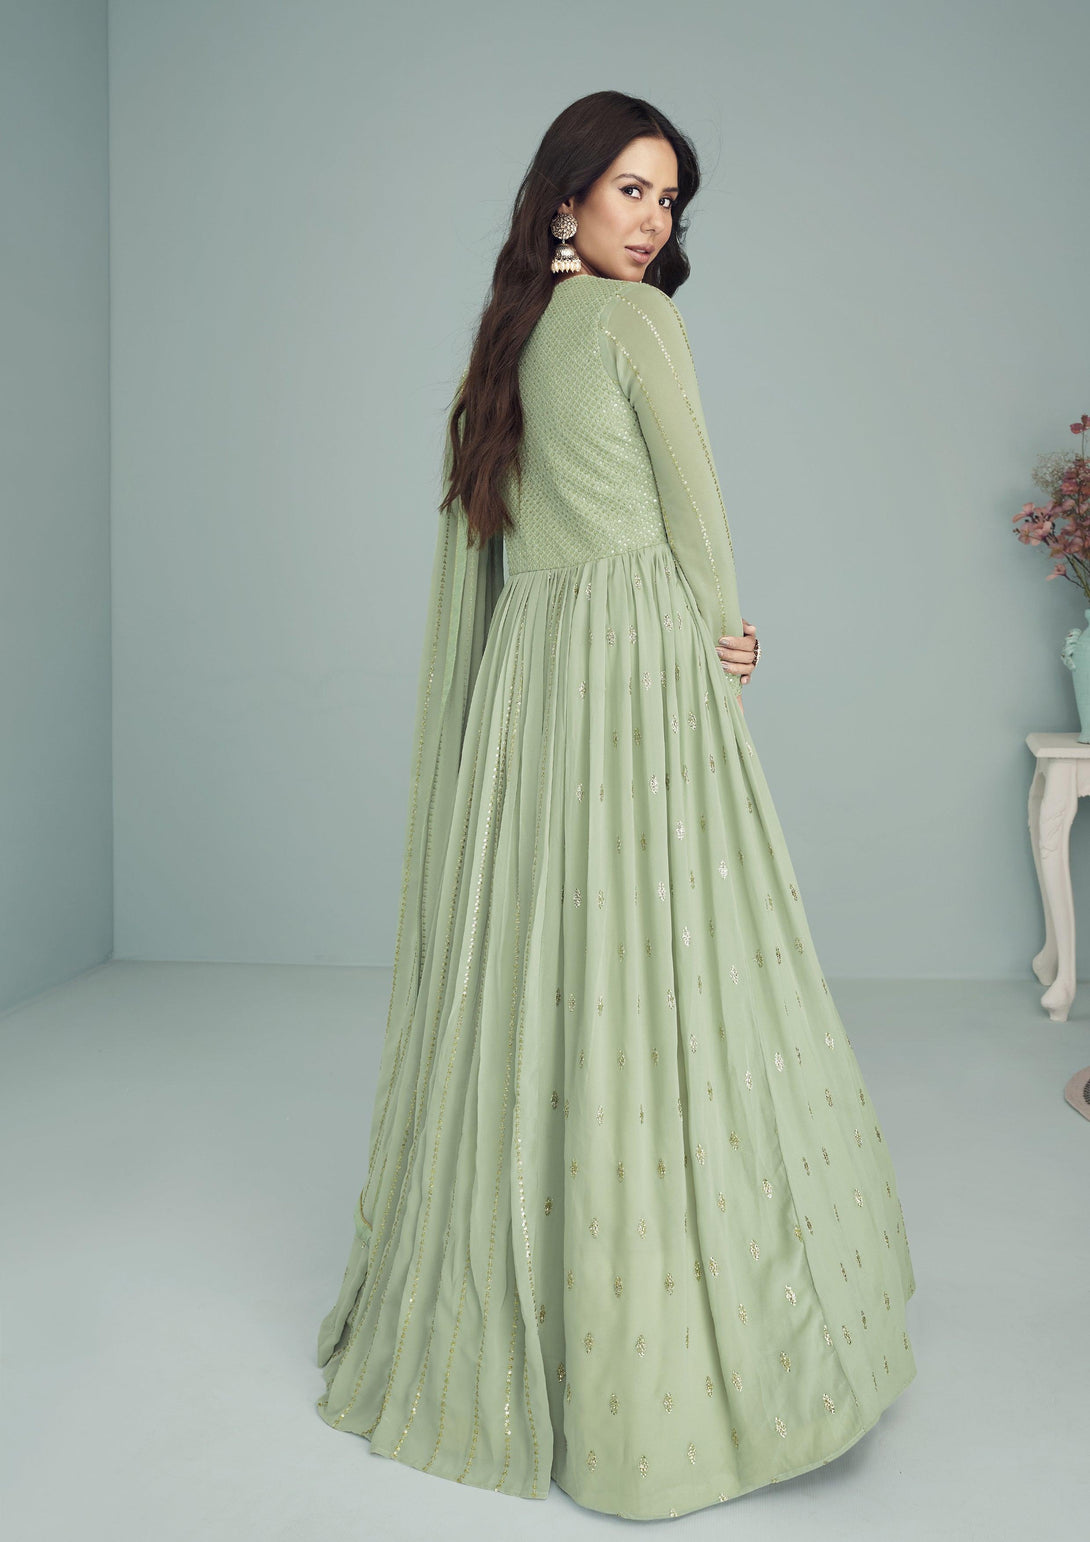 Classic Embroidered Designer Anarkali Suit In Light Green - Indiakreations